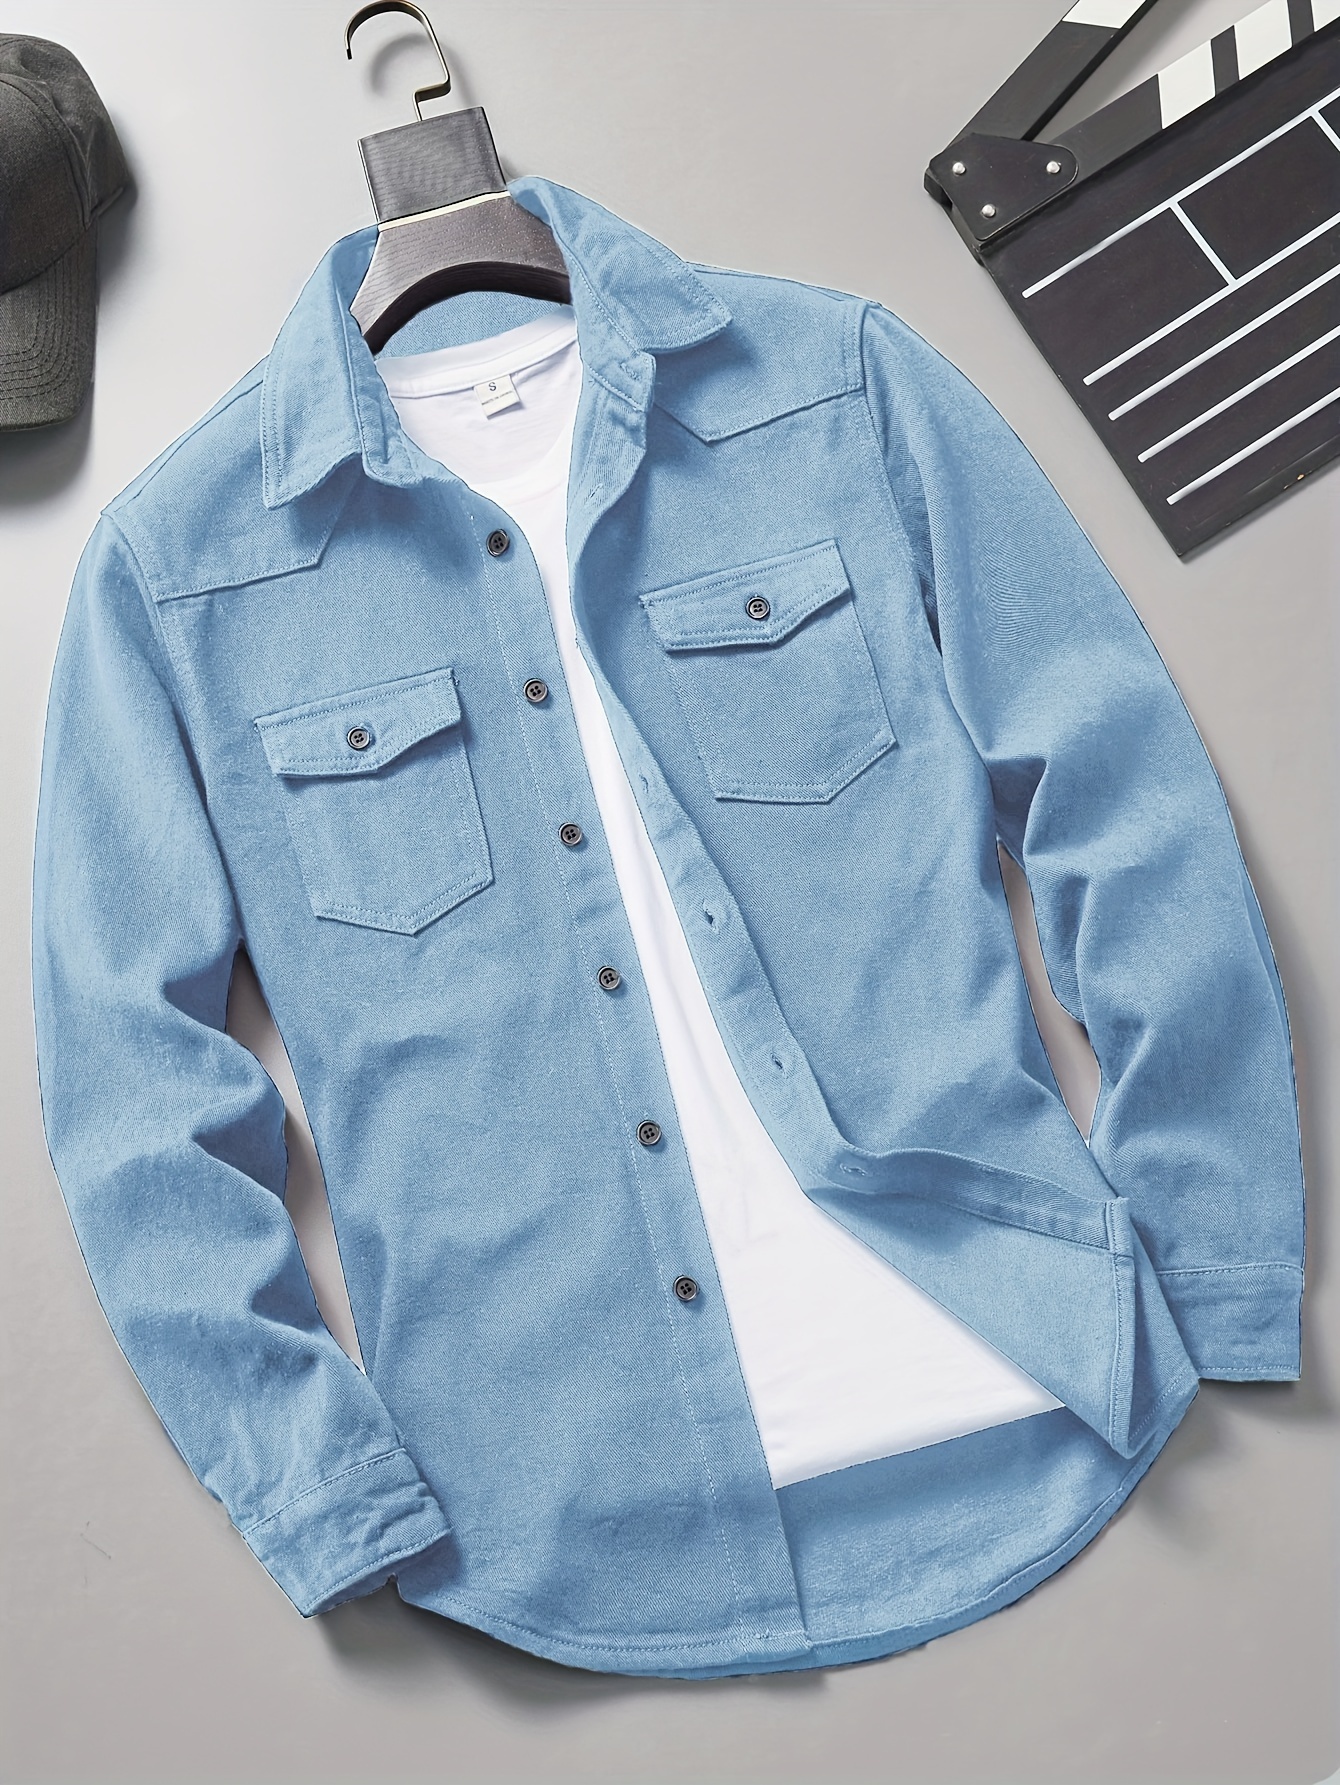 mens chic denim jacket casual street style button up jacket details 5